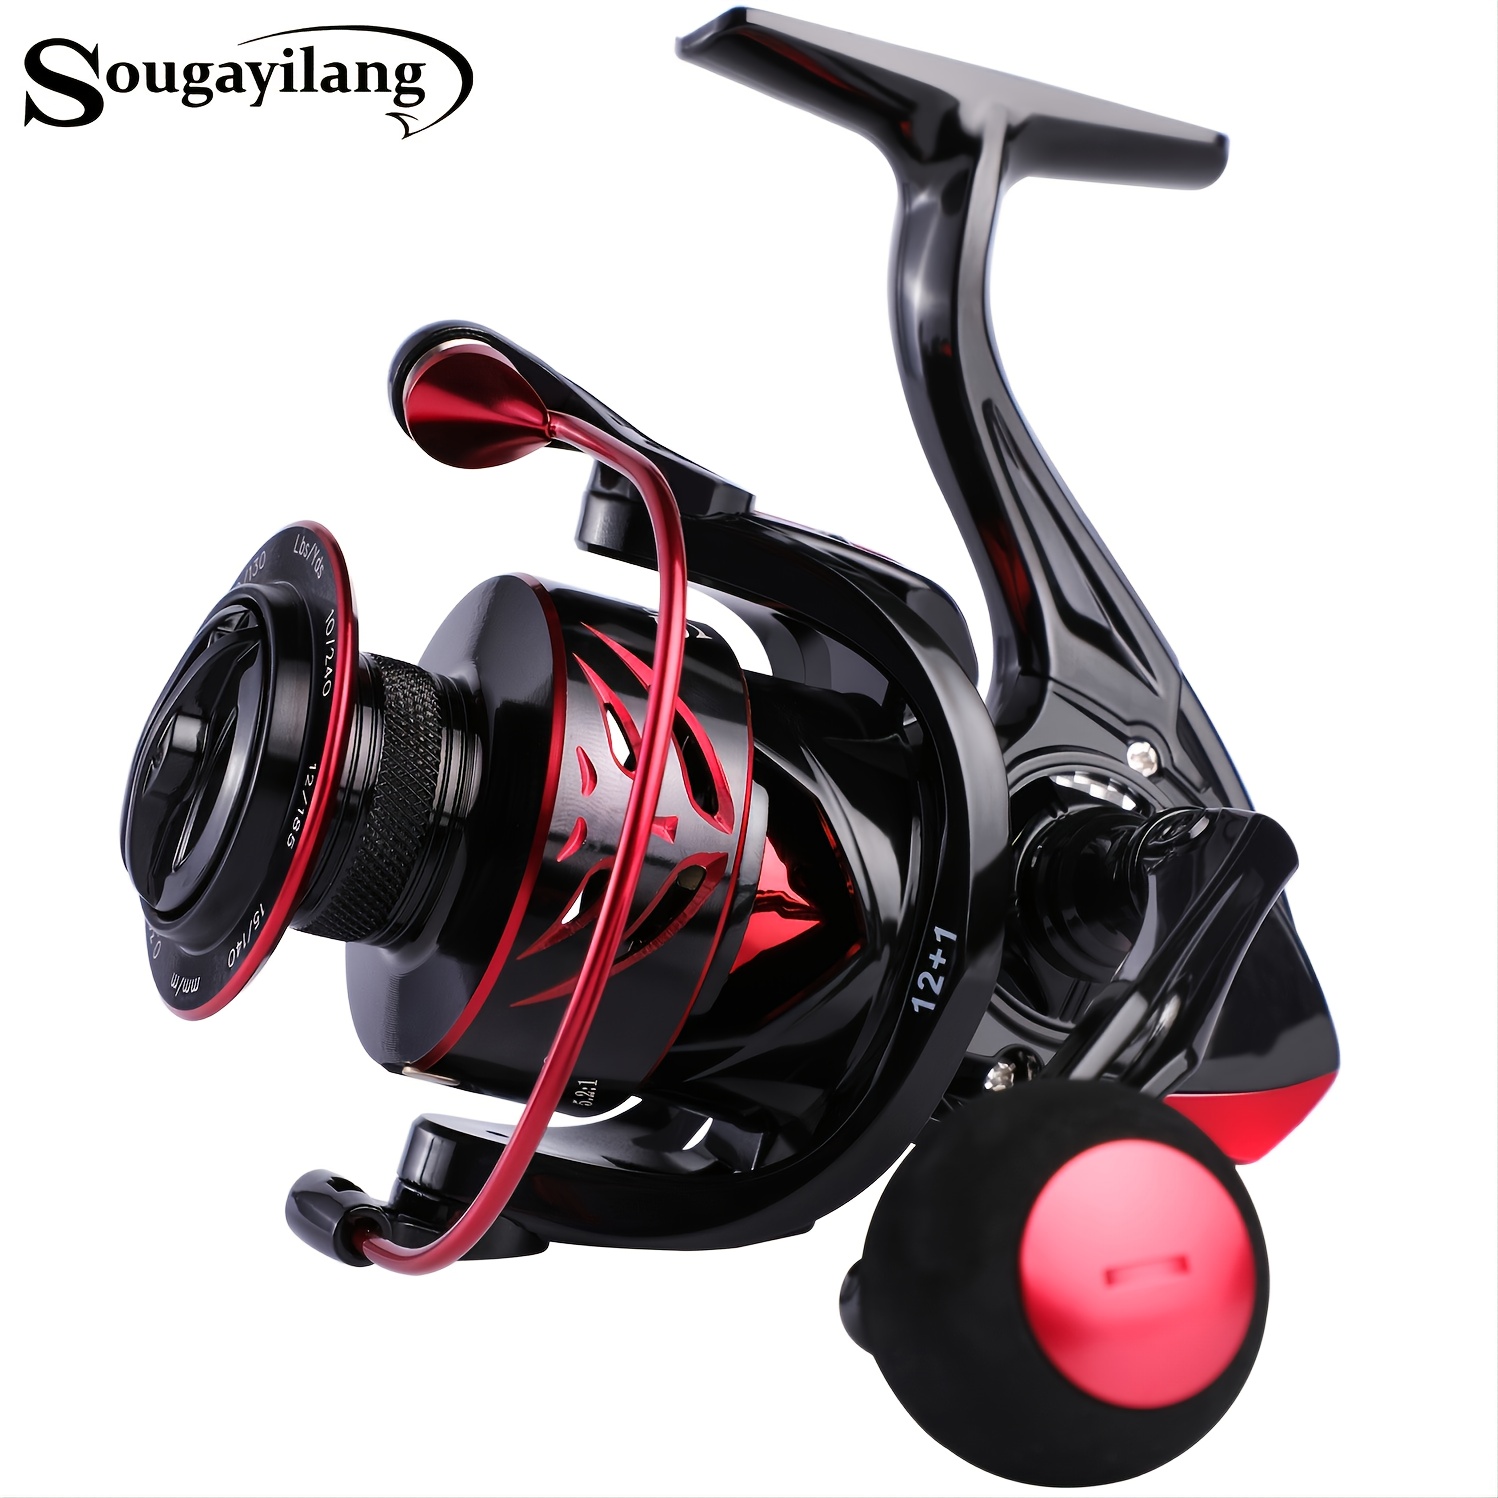 Sougayilang CNC Handle Spinning Fishing Reel - Lightweight Aluminum Body,  Smooth Drag System, Anti-Corrosion, Ideal for Freshwater and Saltwater Fishi